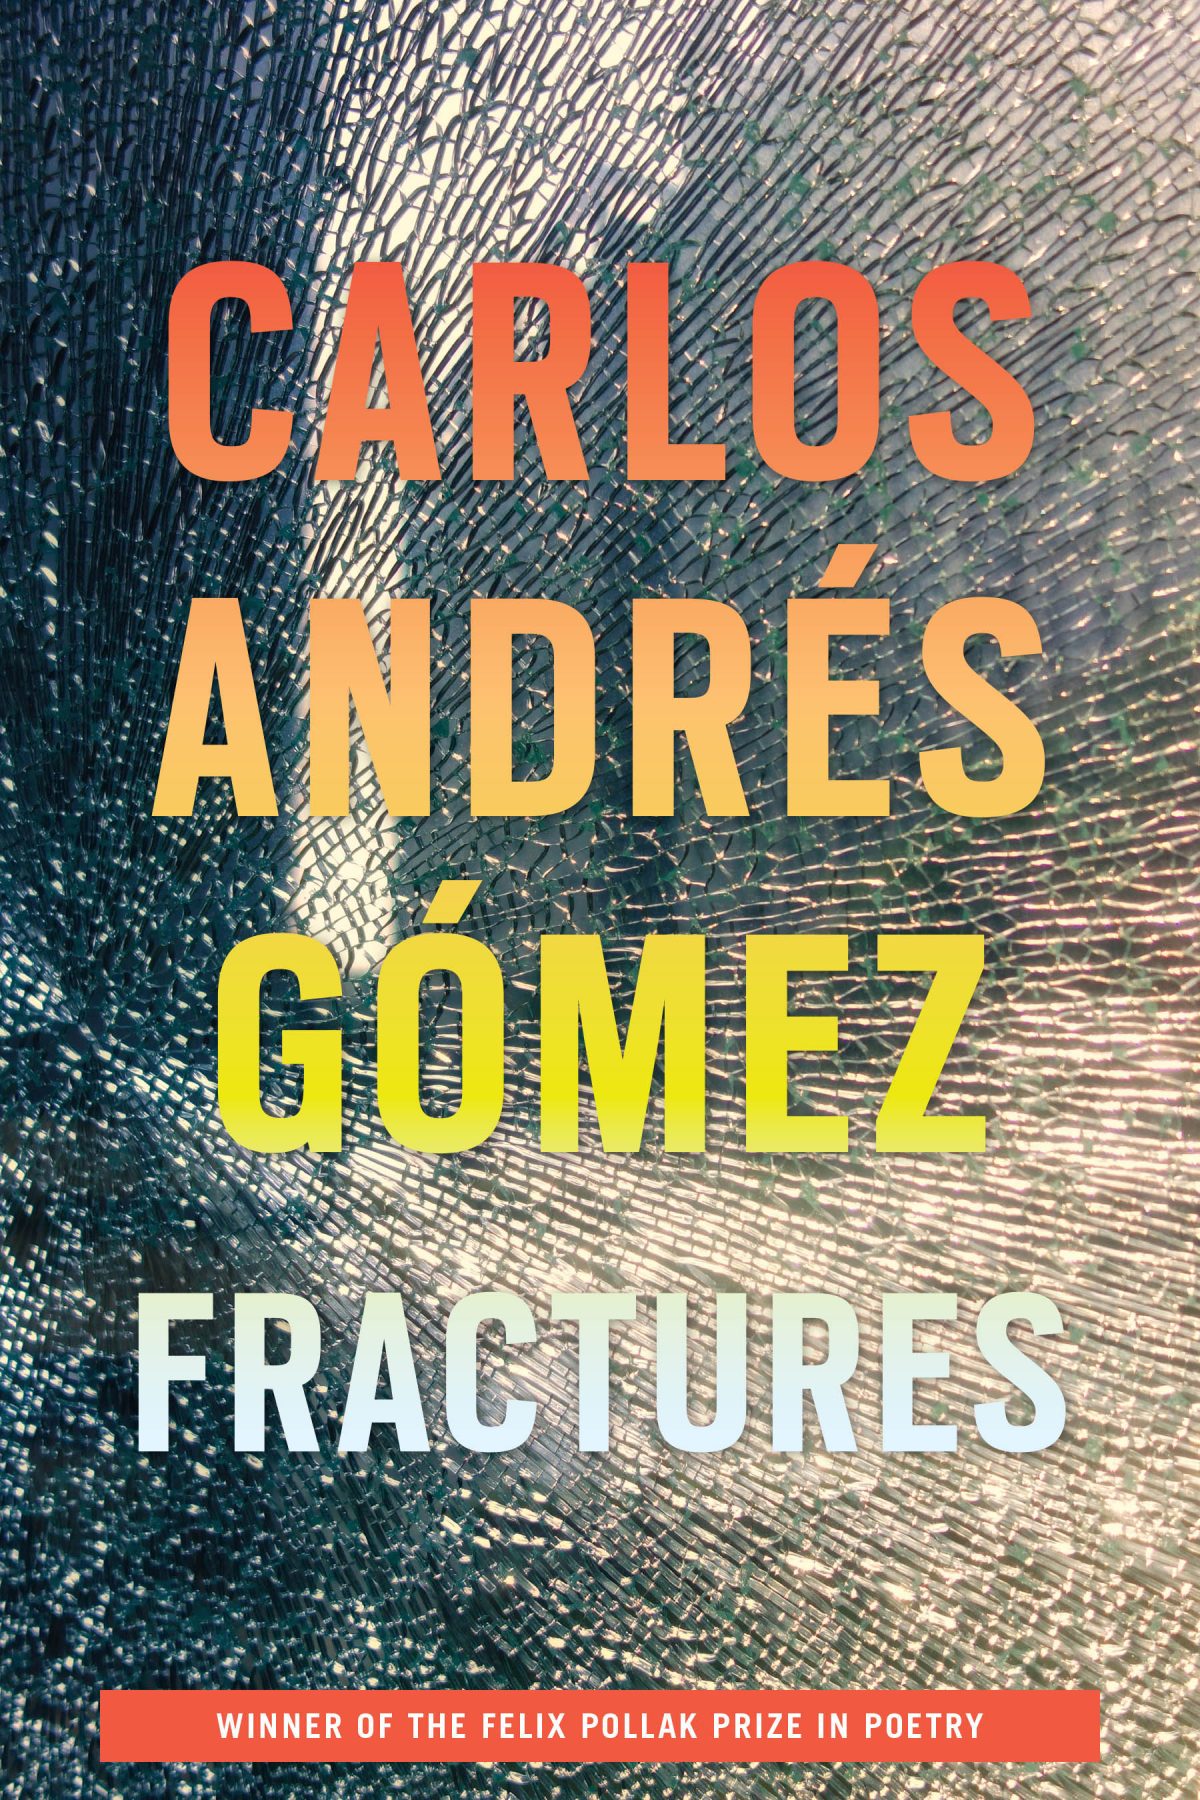 Cover reveal for my debut full-length collection, “Fractures”!